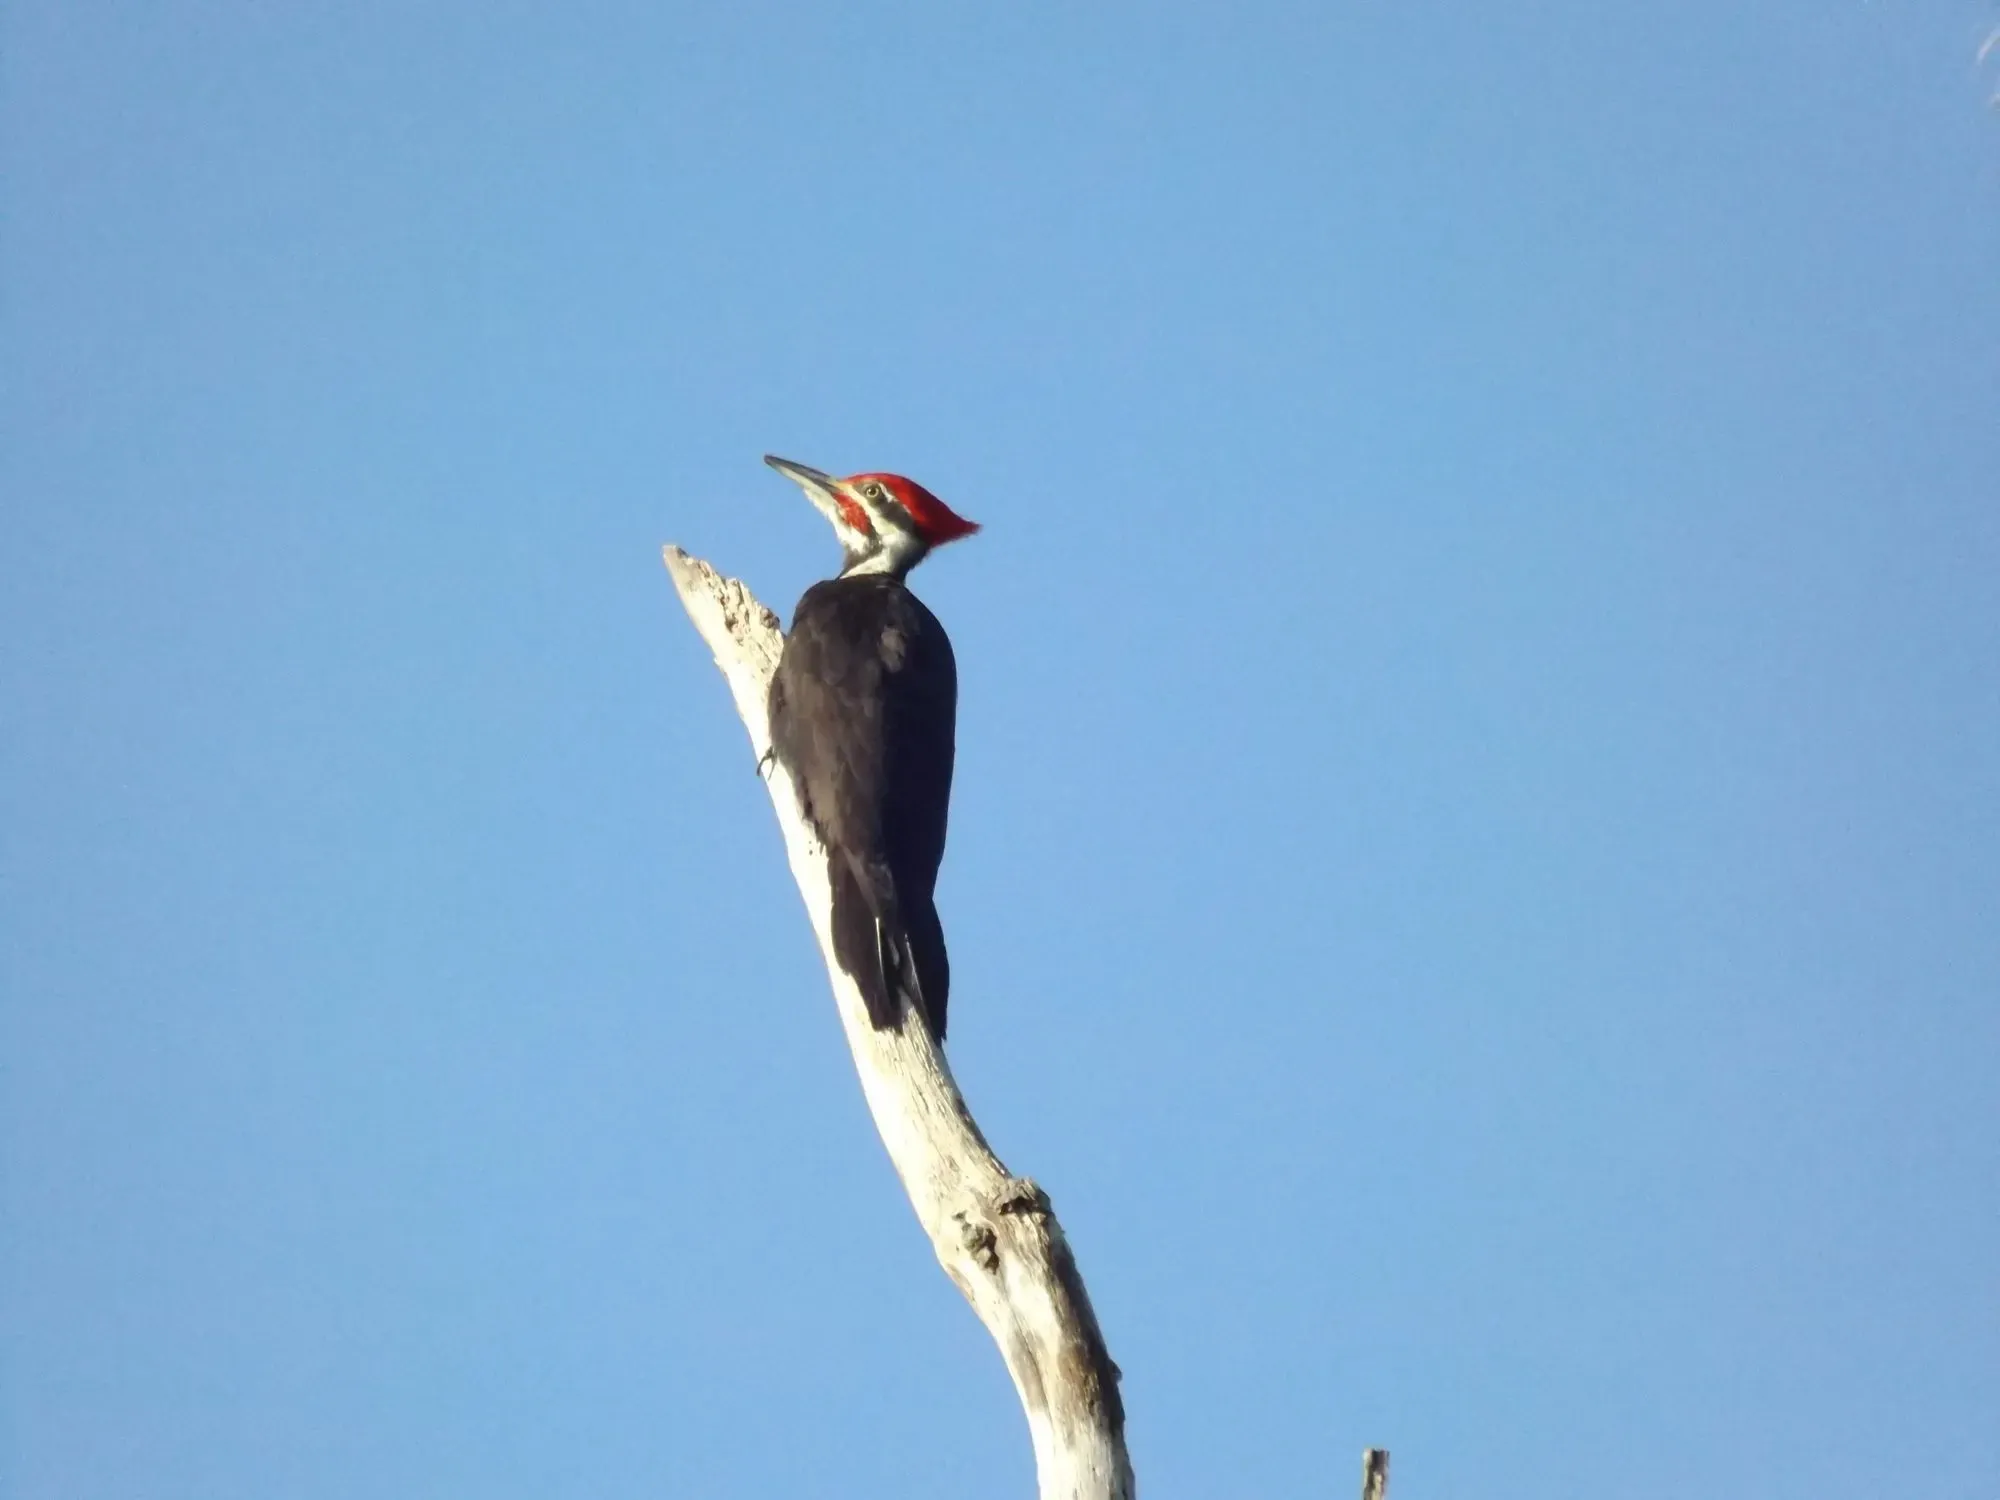 These woodpeckers are mostly black, white, and gray with a prominent yellow patch on the crown.